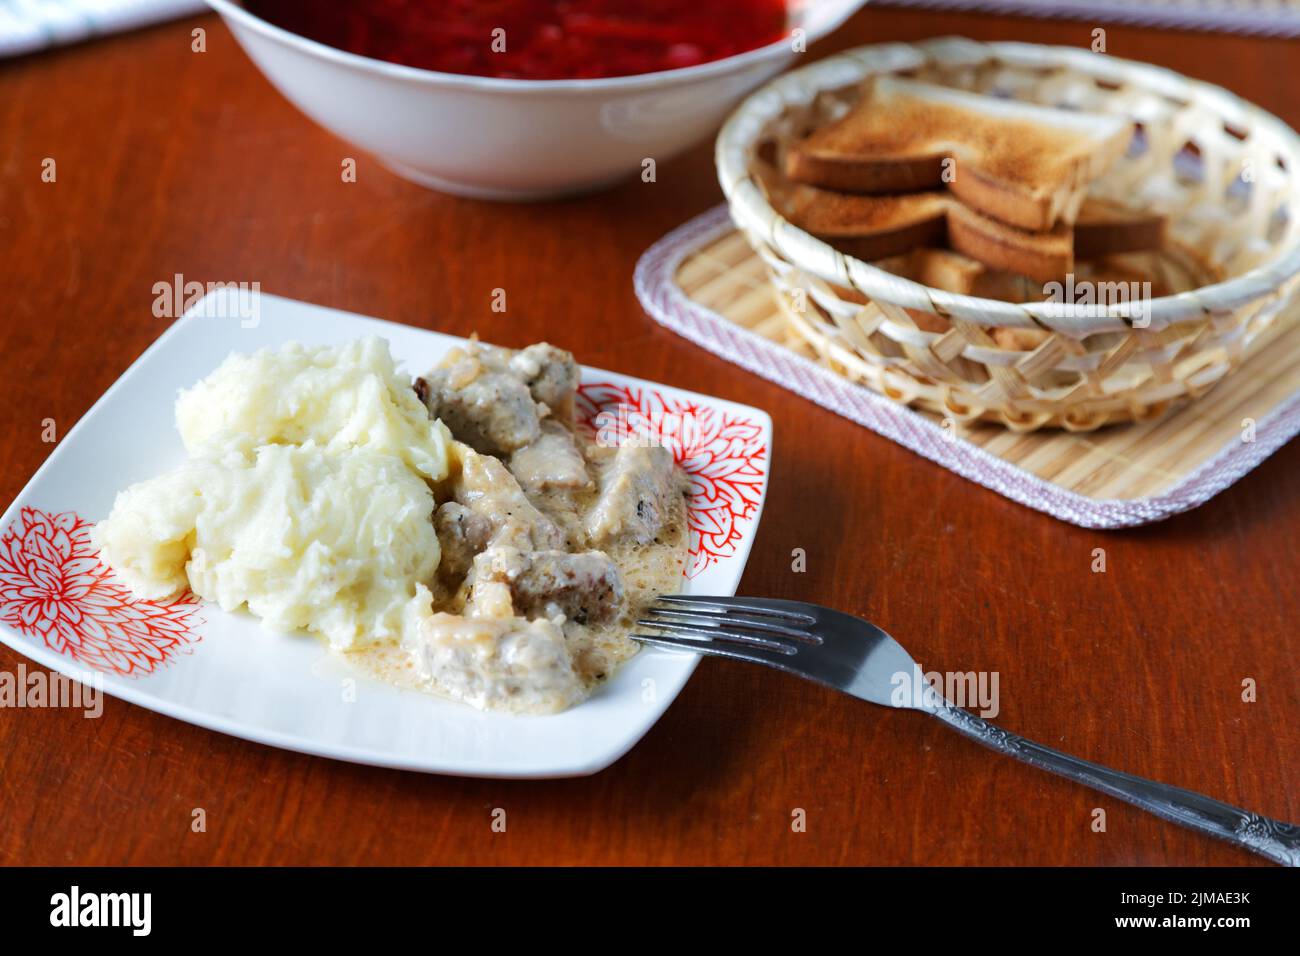 Plate of potatoes with meat and croutons on the kitchen table Stock Photo